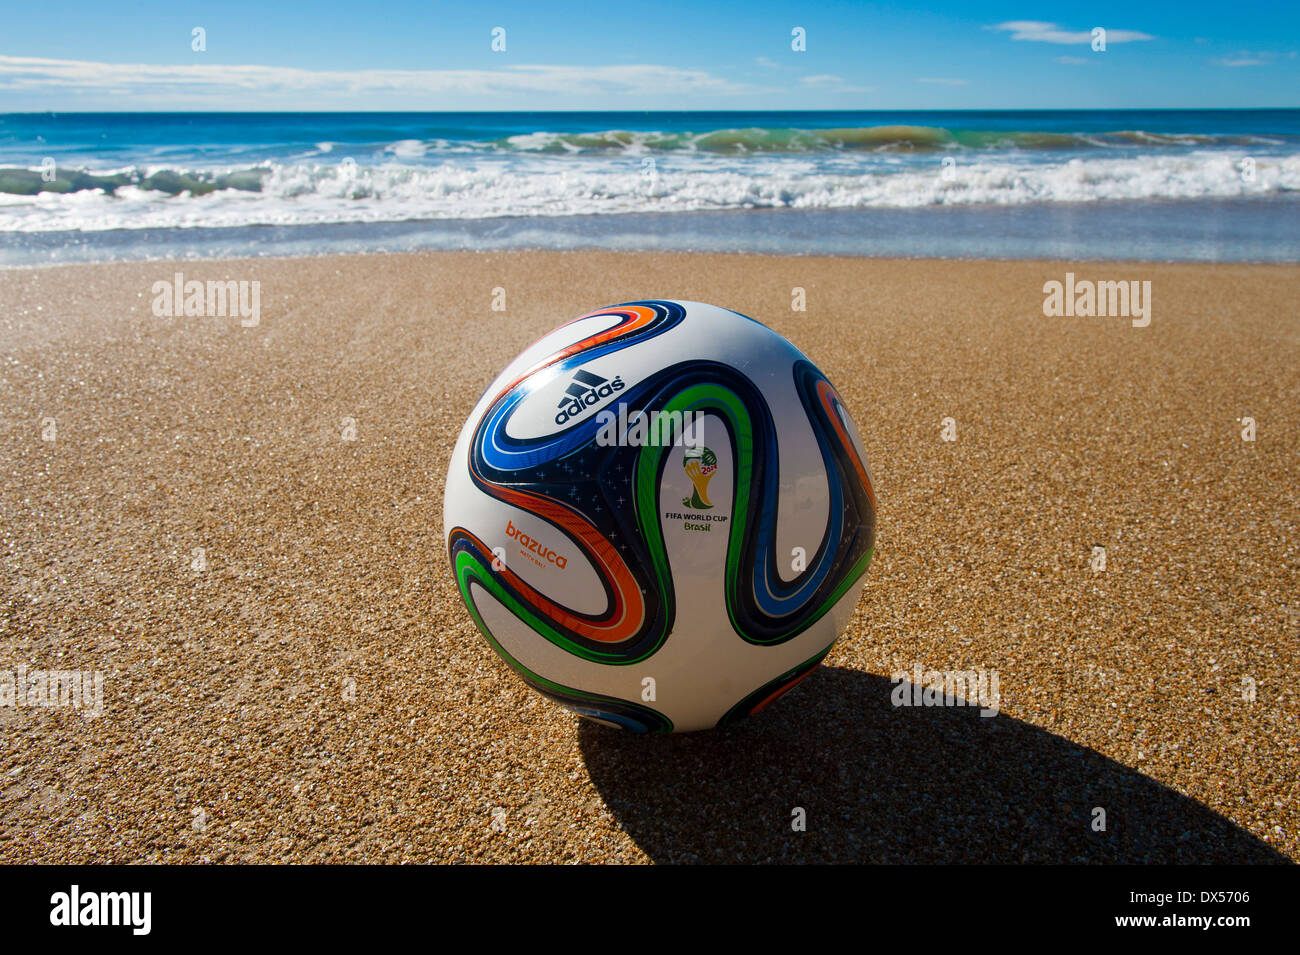 Brazuca, official matchball of FIFA World Cup Brazil 2014 Stock